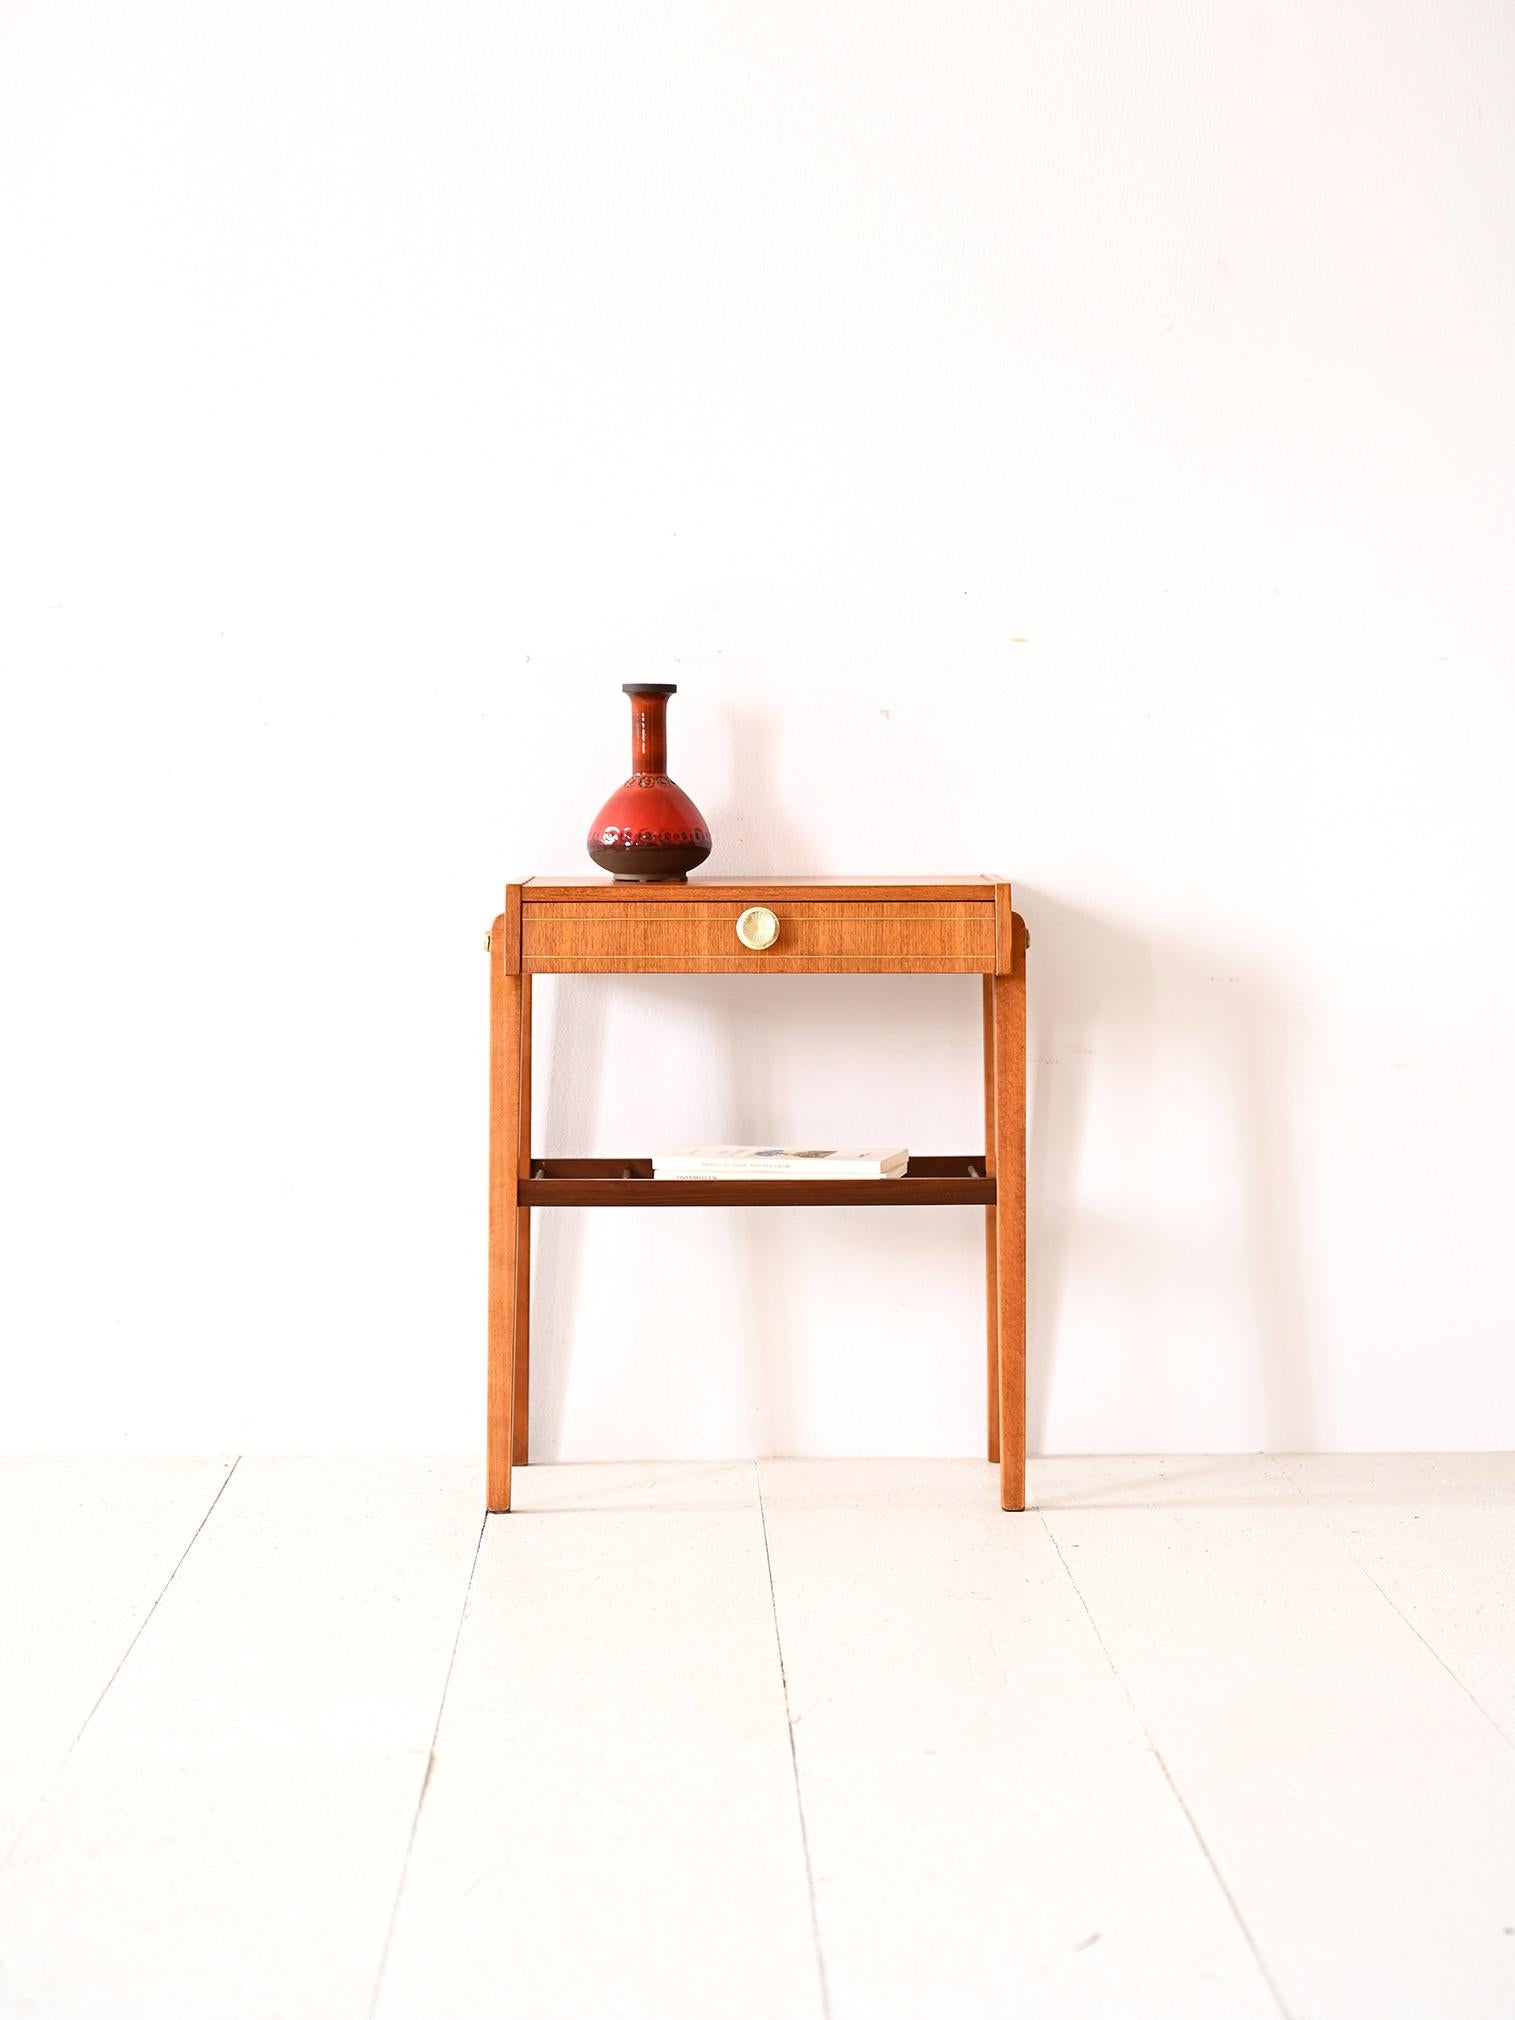 Side table with drawer and magazine rack top.

The style of this bedside table perfectly traces mid-century taste and design that combines a love of simple lines without forgetting attention to detail. 
Consisting of a teak top and beech legs, it